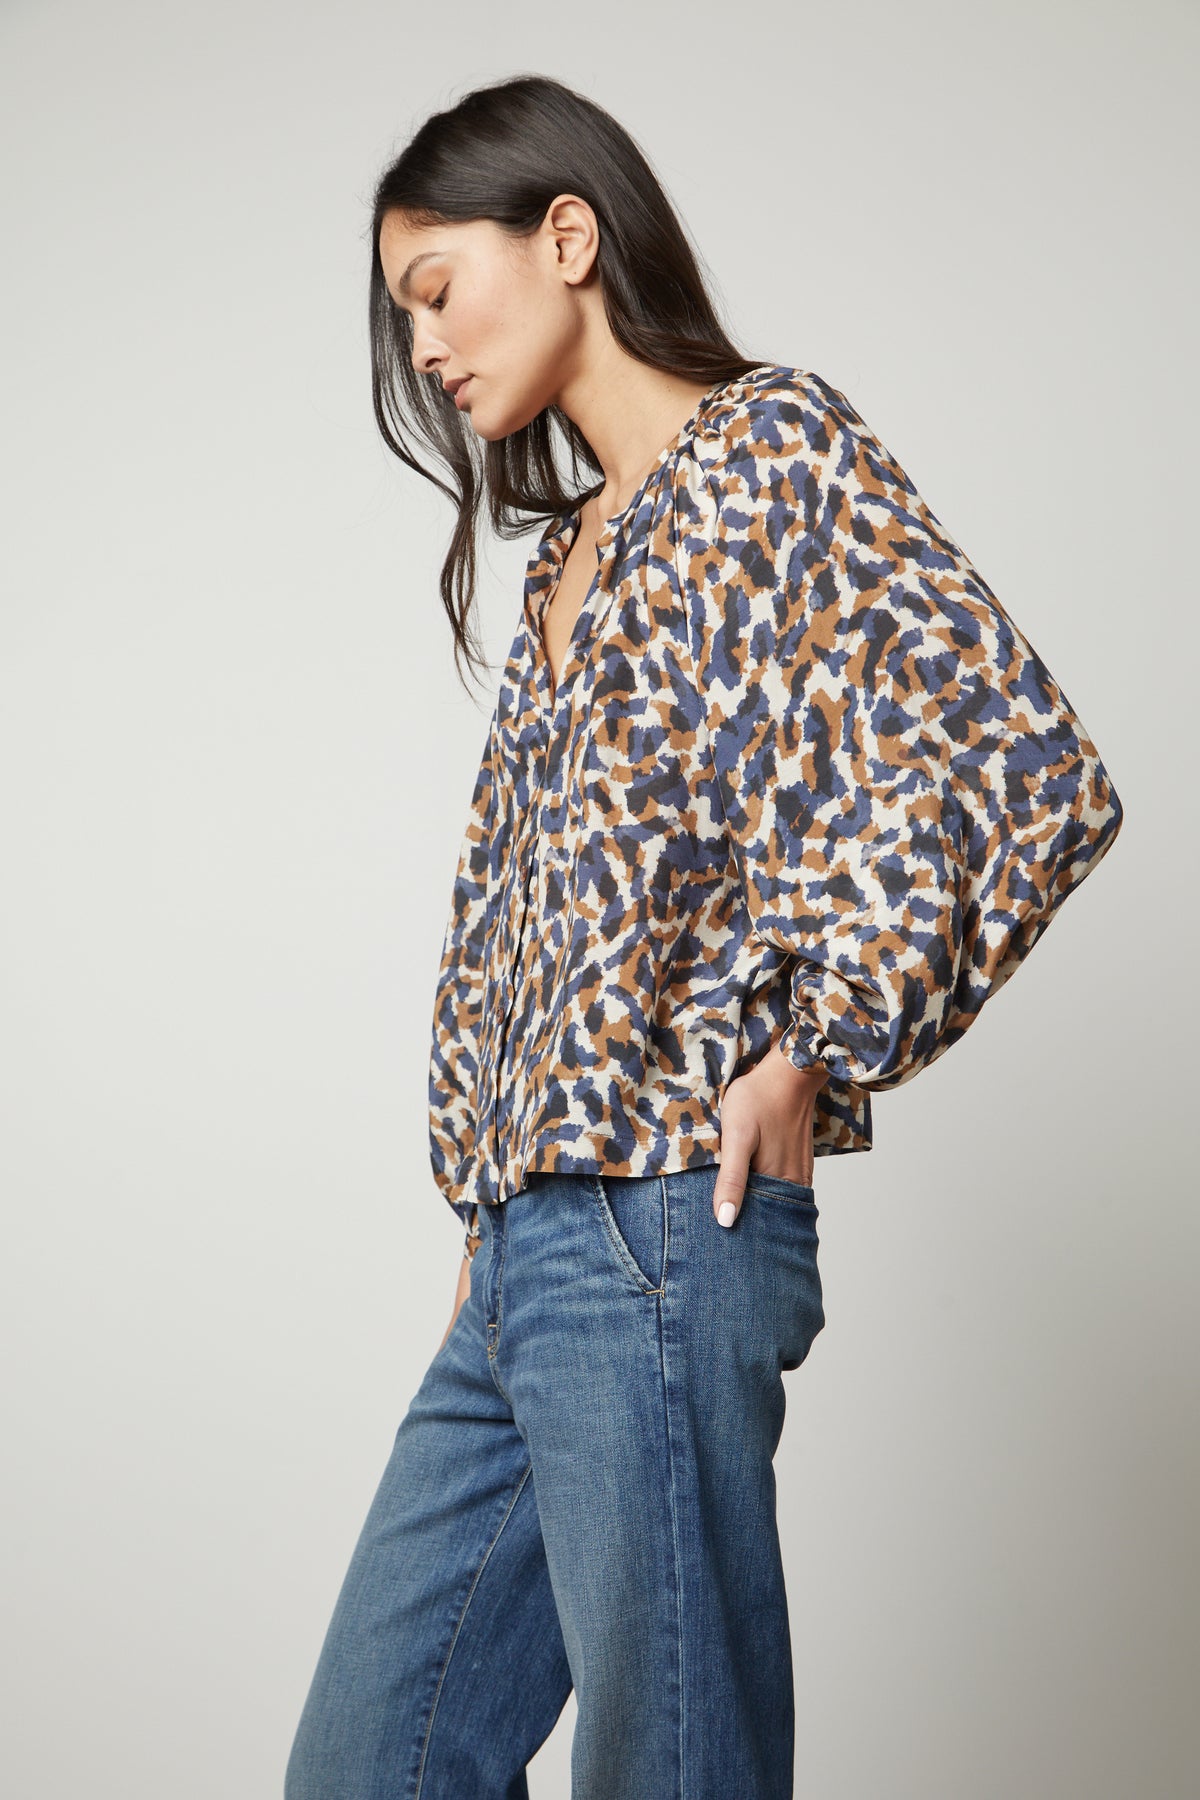 The model is wearing jeans and a printed button-up top.-26895474557121